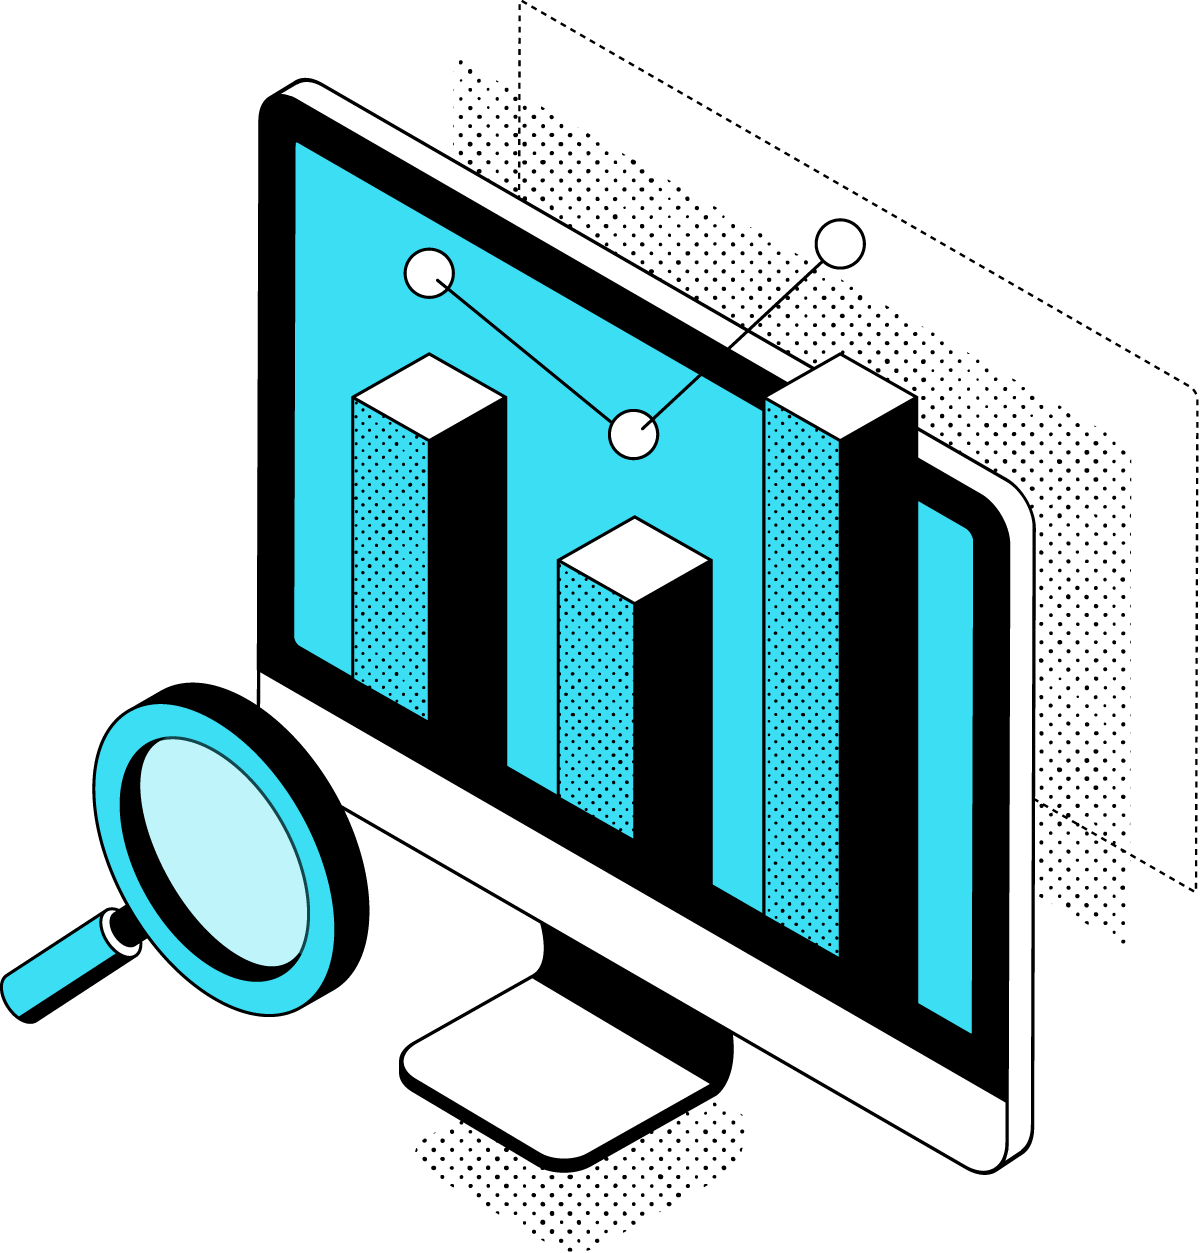 Isometric illustration of a computer screen with a magnifying glass and bar charts